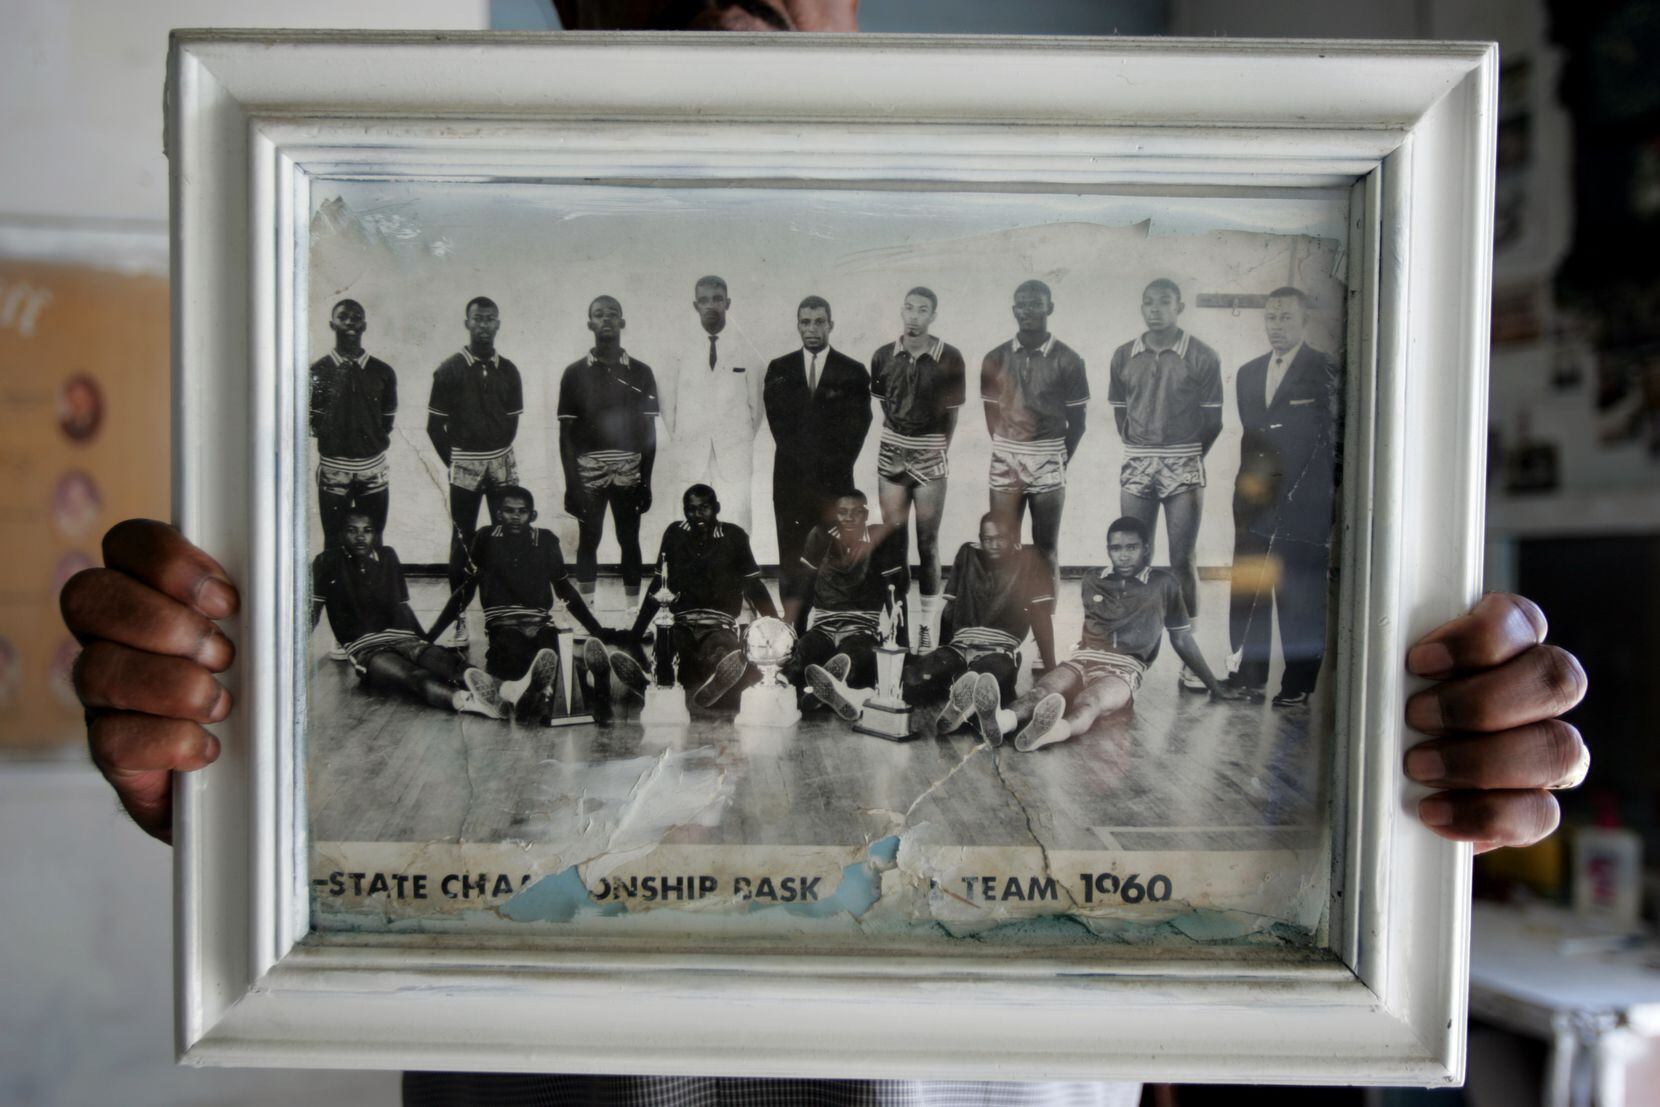 The 1960 state championship photograph of the James Madison High School basketball team that coach Euril Henson won when Dave Stallworth was on his team.  Coach Henson is the fourth from the left, in the back row, in the white suit.  Dave Stallworth is the third from the left, in the front row, sitting directly under coach Henson.